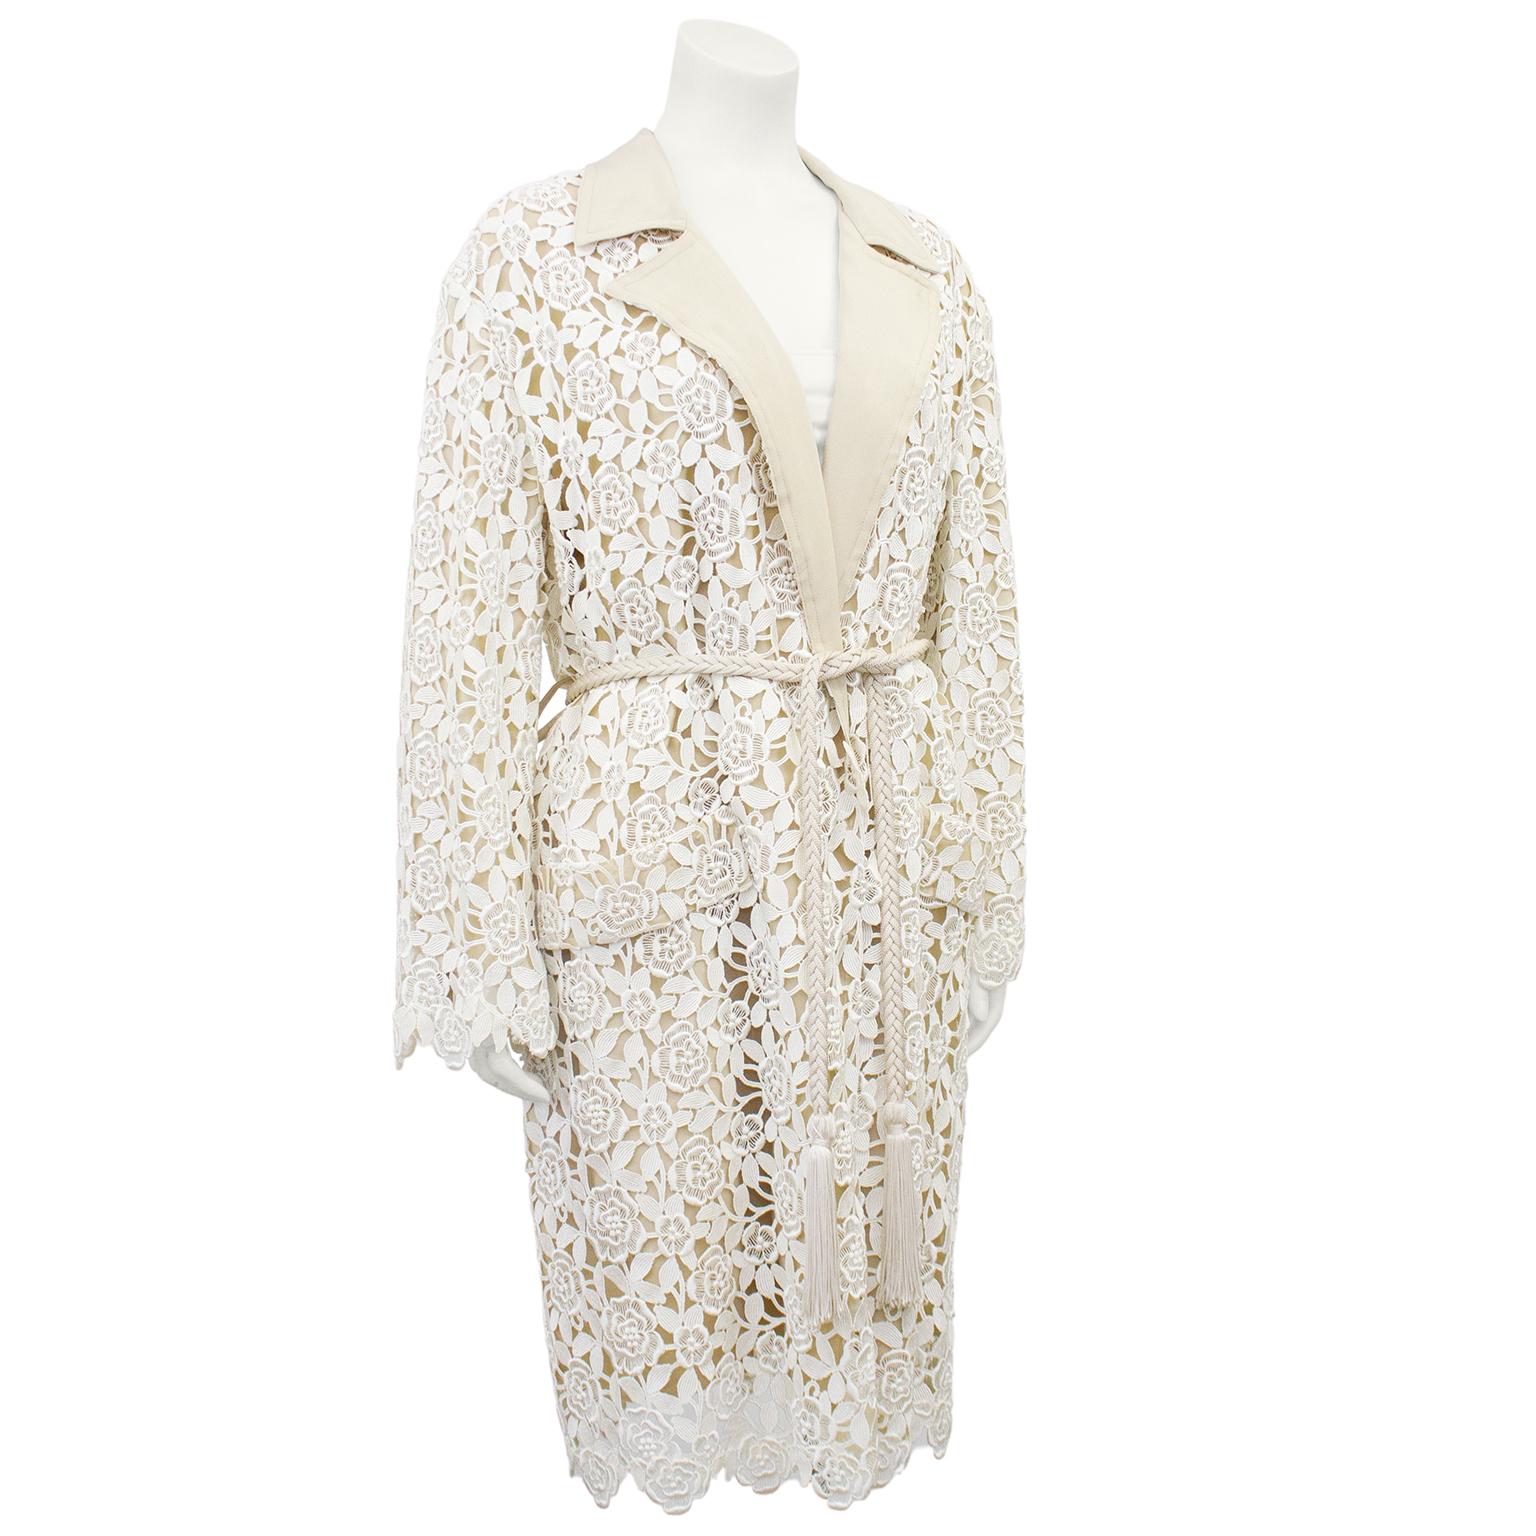 Stunning Yves Saint Laurent Rive Gauche coat from the 1980's. Beige silk with a cream floral guipoire lace overlay. Notched collar and scalloped edge at cuffs and hem. Faux horizontal slit pockets. Two belt loops with thin braided belt with tassel